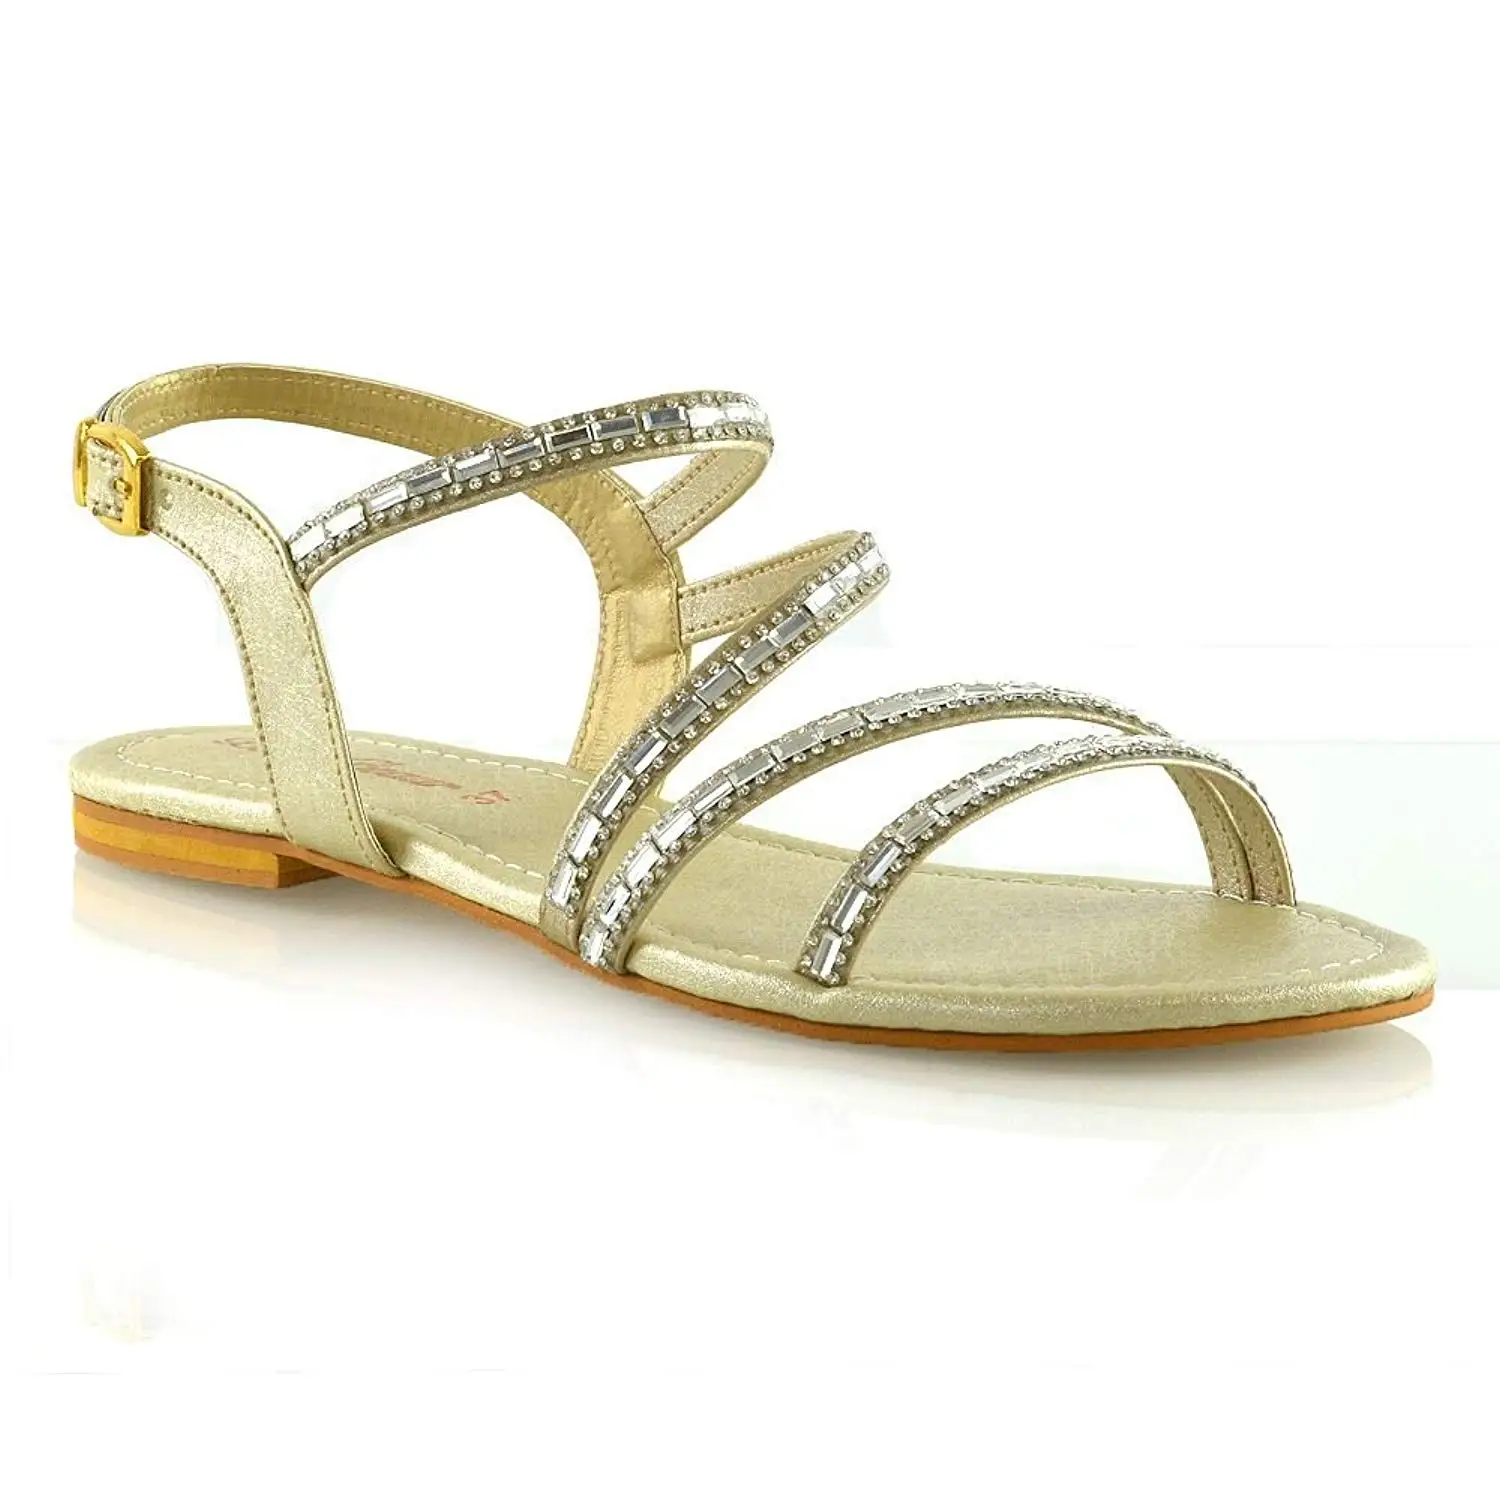 Buy ESSEX GLAM Womens Flat Sandals Ladies Open Toe Embellished Strappy ...